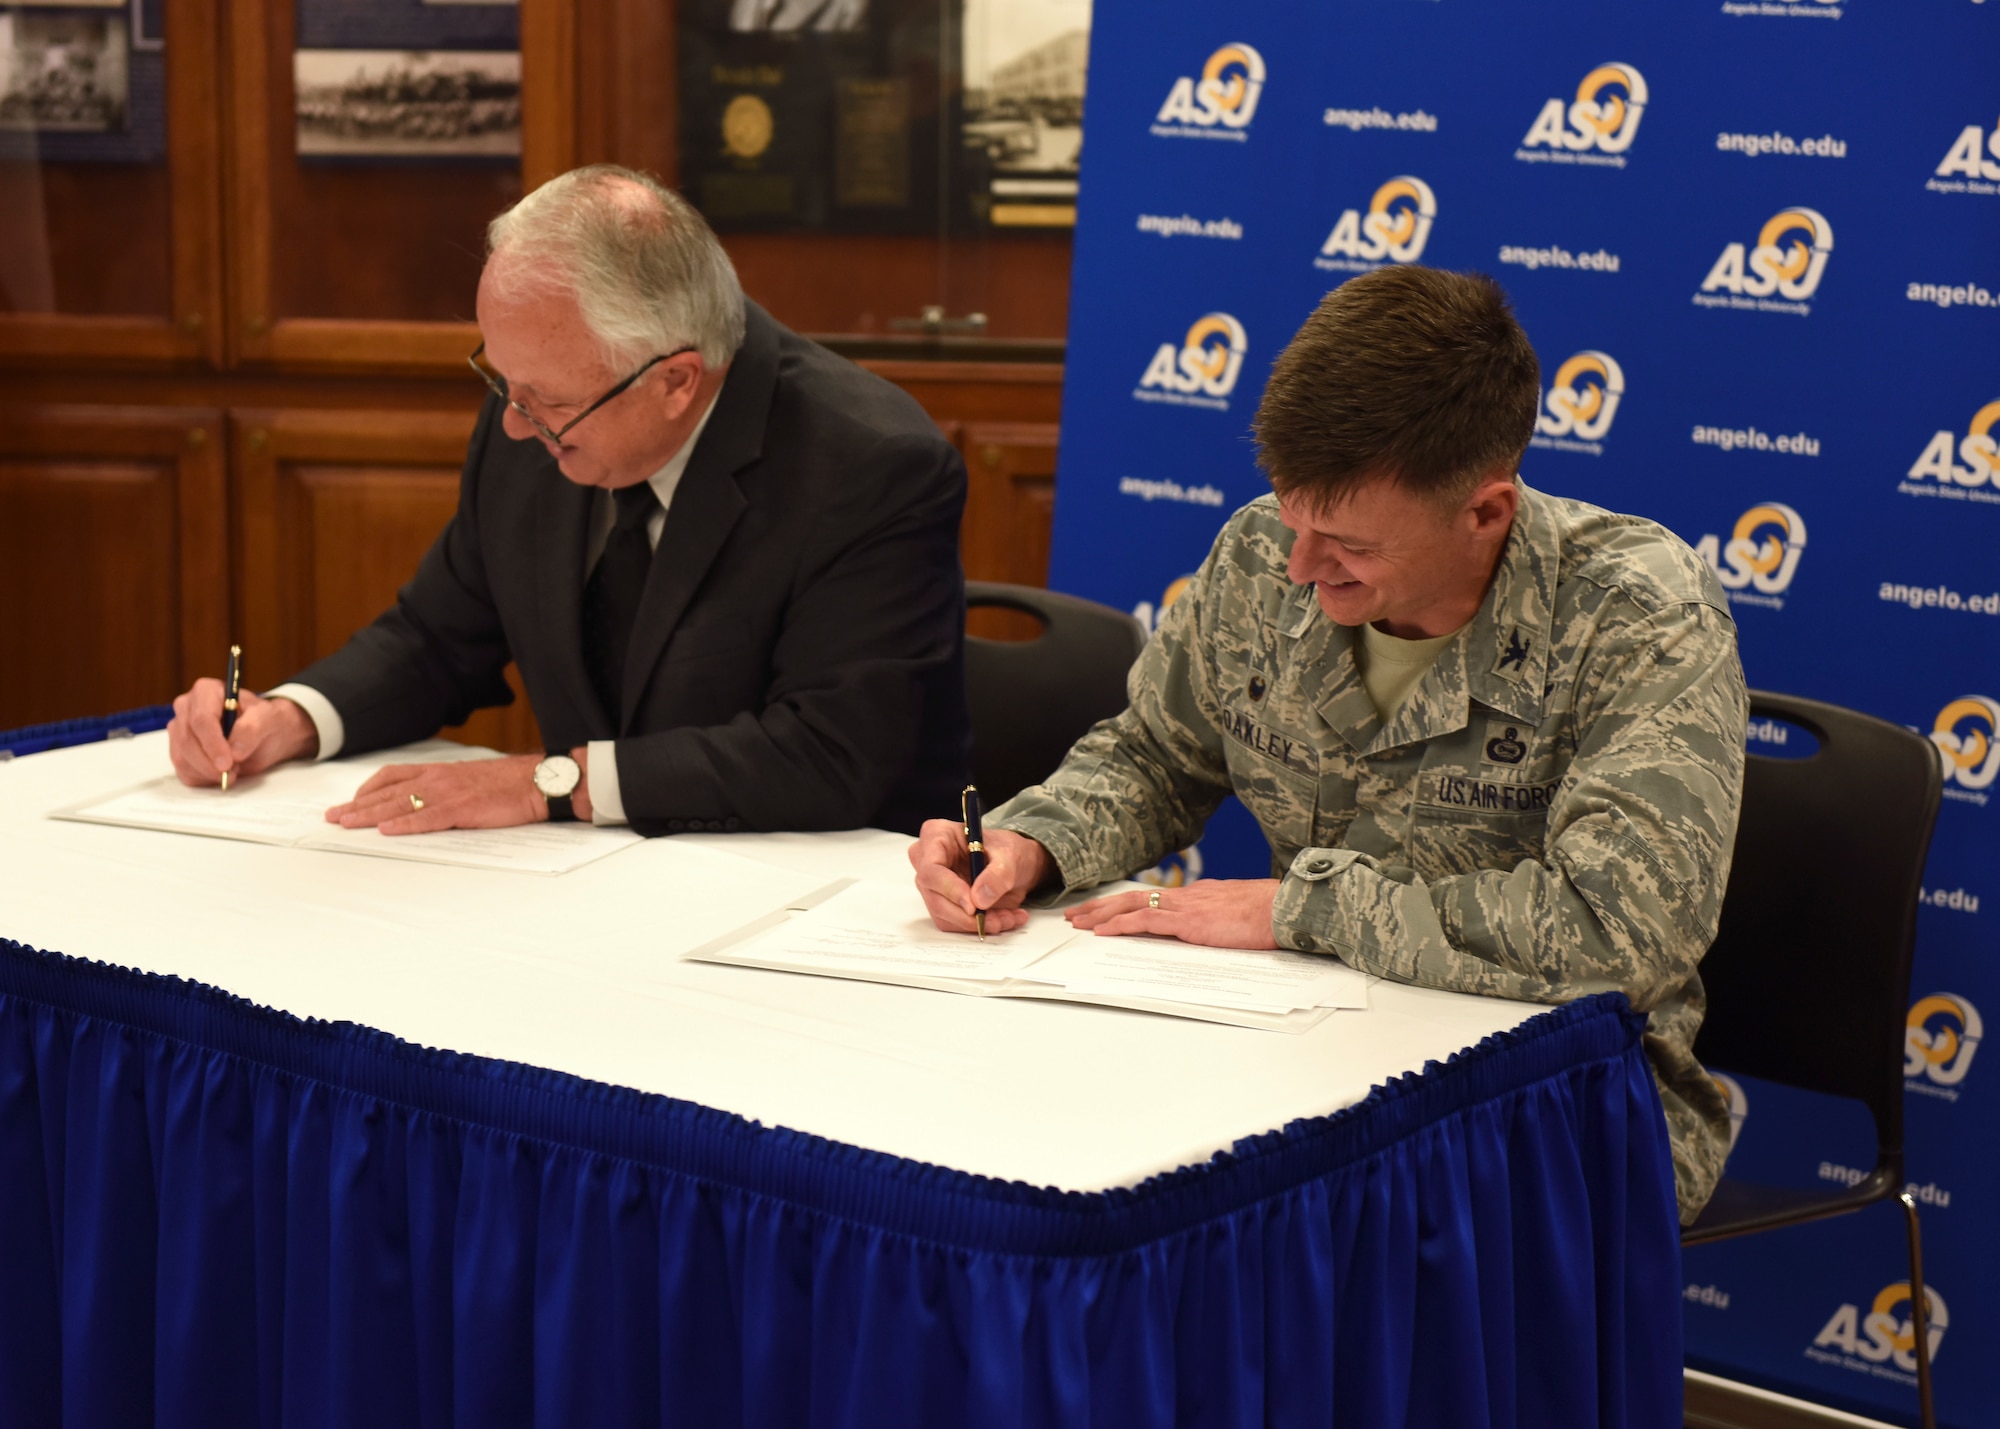 Angelo State University President, Dr. Brian May and U.S. Air Force Col. Thomas Coakley, 17th Training Group commander, sign a Memorandum of Understanding, at ASU, Texas, April 15, 2019. The MOUR allows 14N professionals to transfer 12 credit hours toward two master’s degree through Angelo State University (U.S. Air Force photo by Airman 1st Class Zachary Chapman/Released)